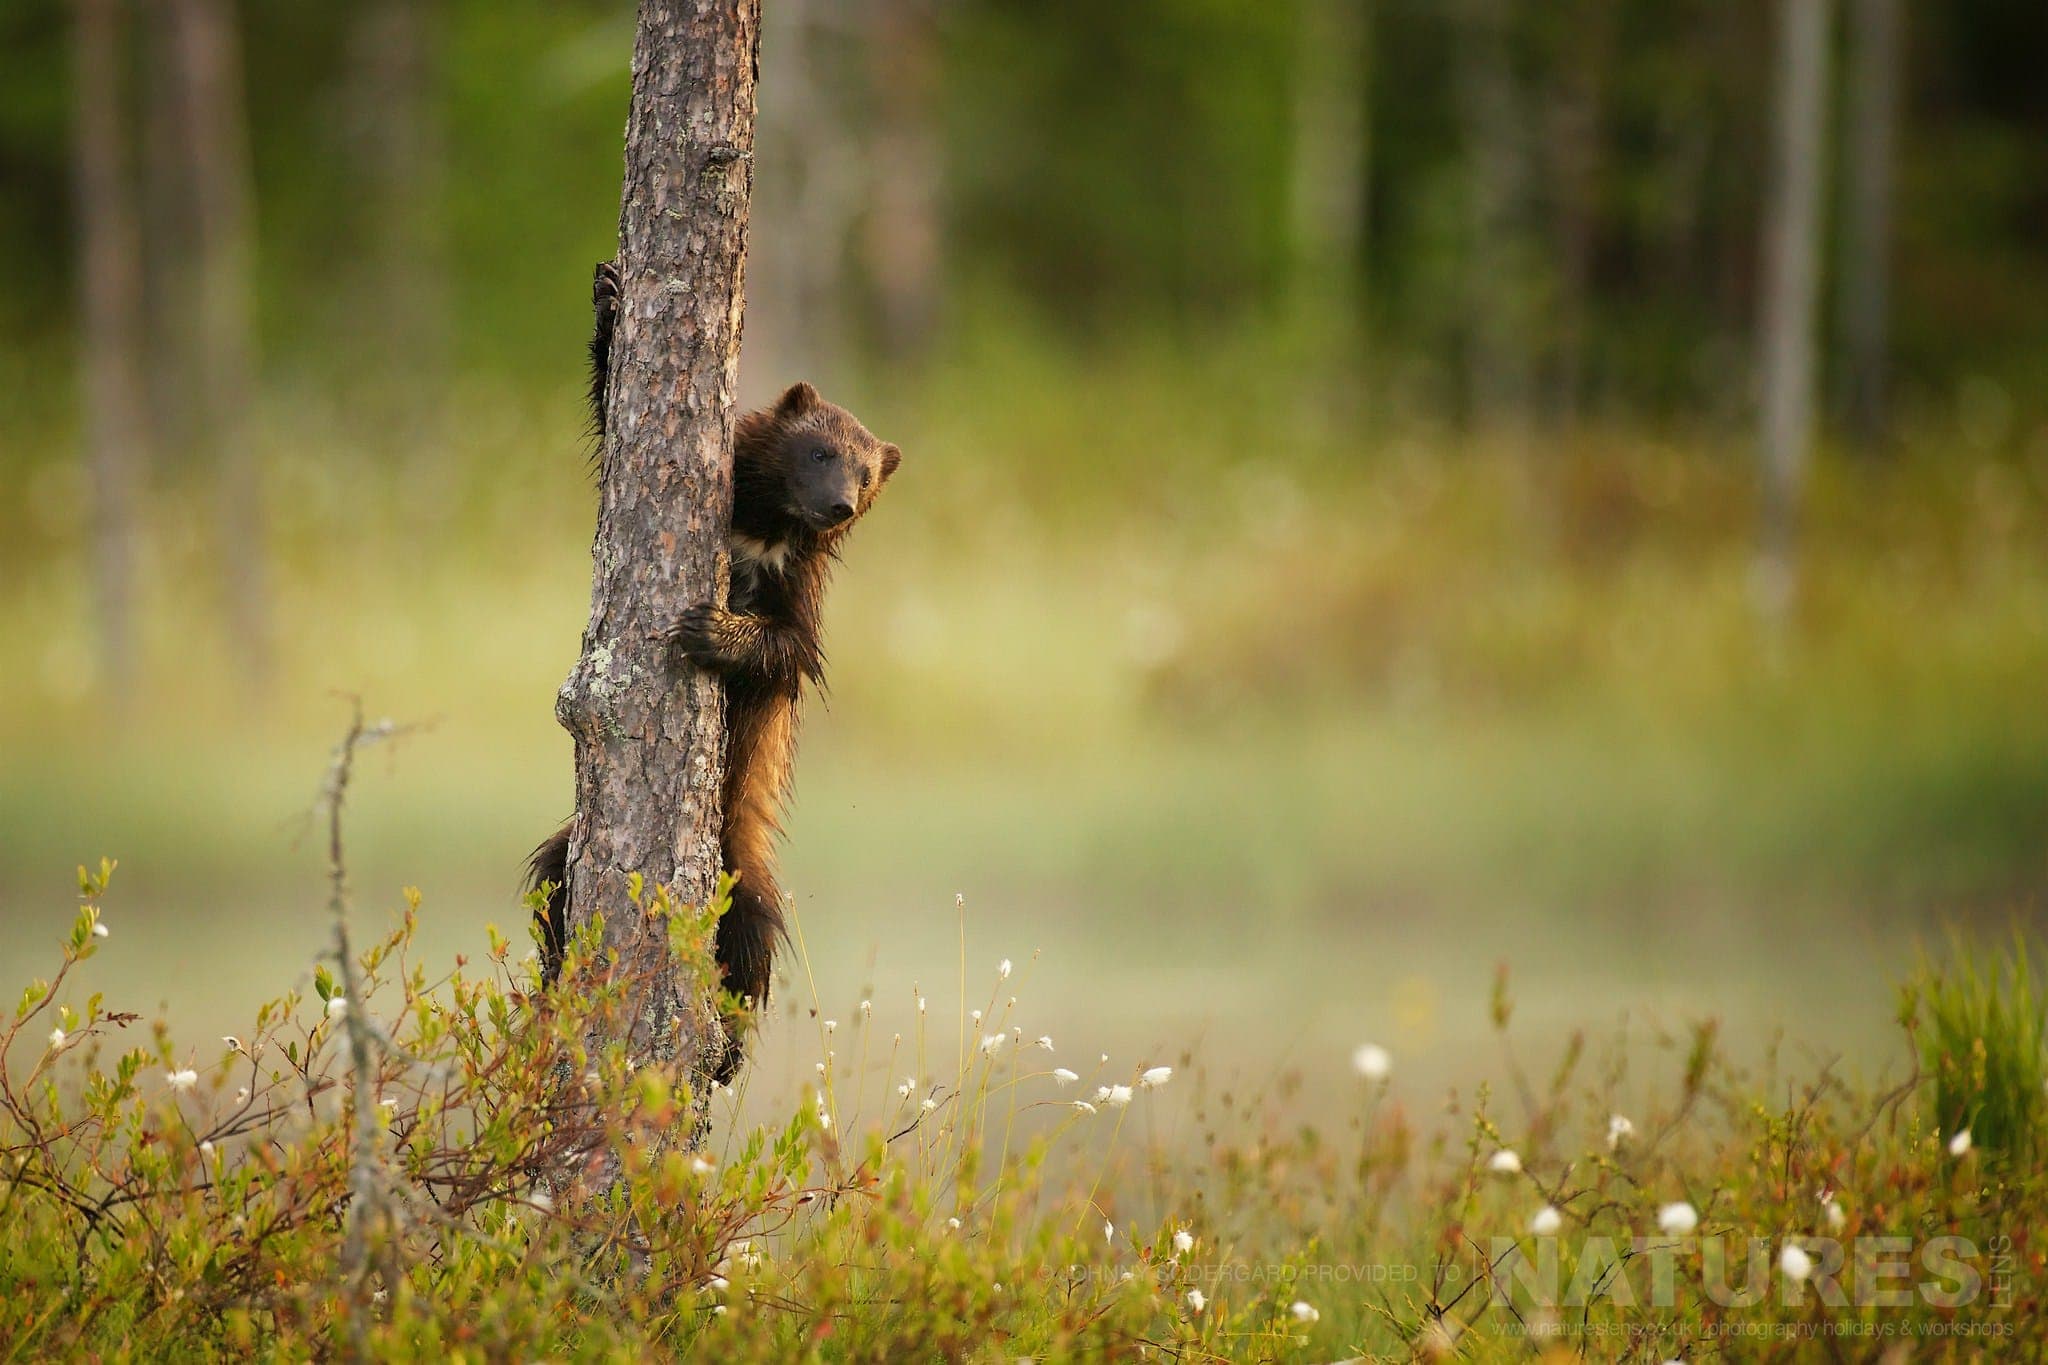 One Of The Wolverine Peers Around A Tree Photographed By Johnny Södergård During The Natureslens Wild Brown Bears Of Finland Photography Holiday